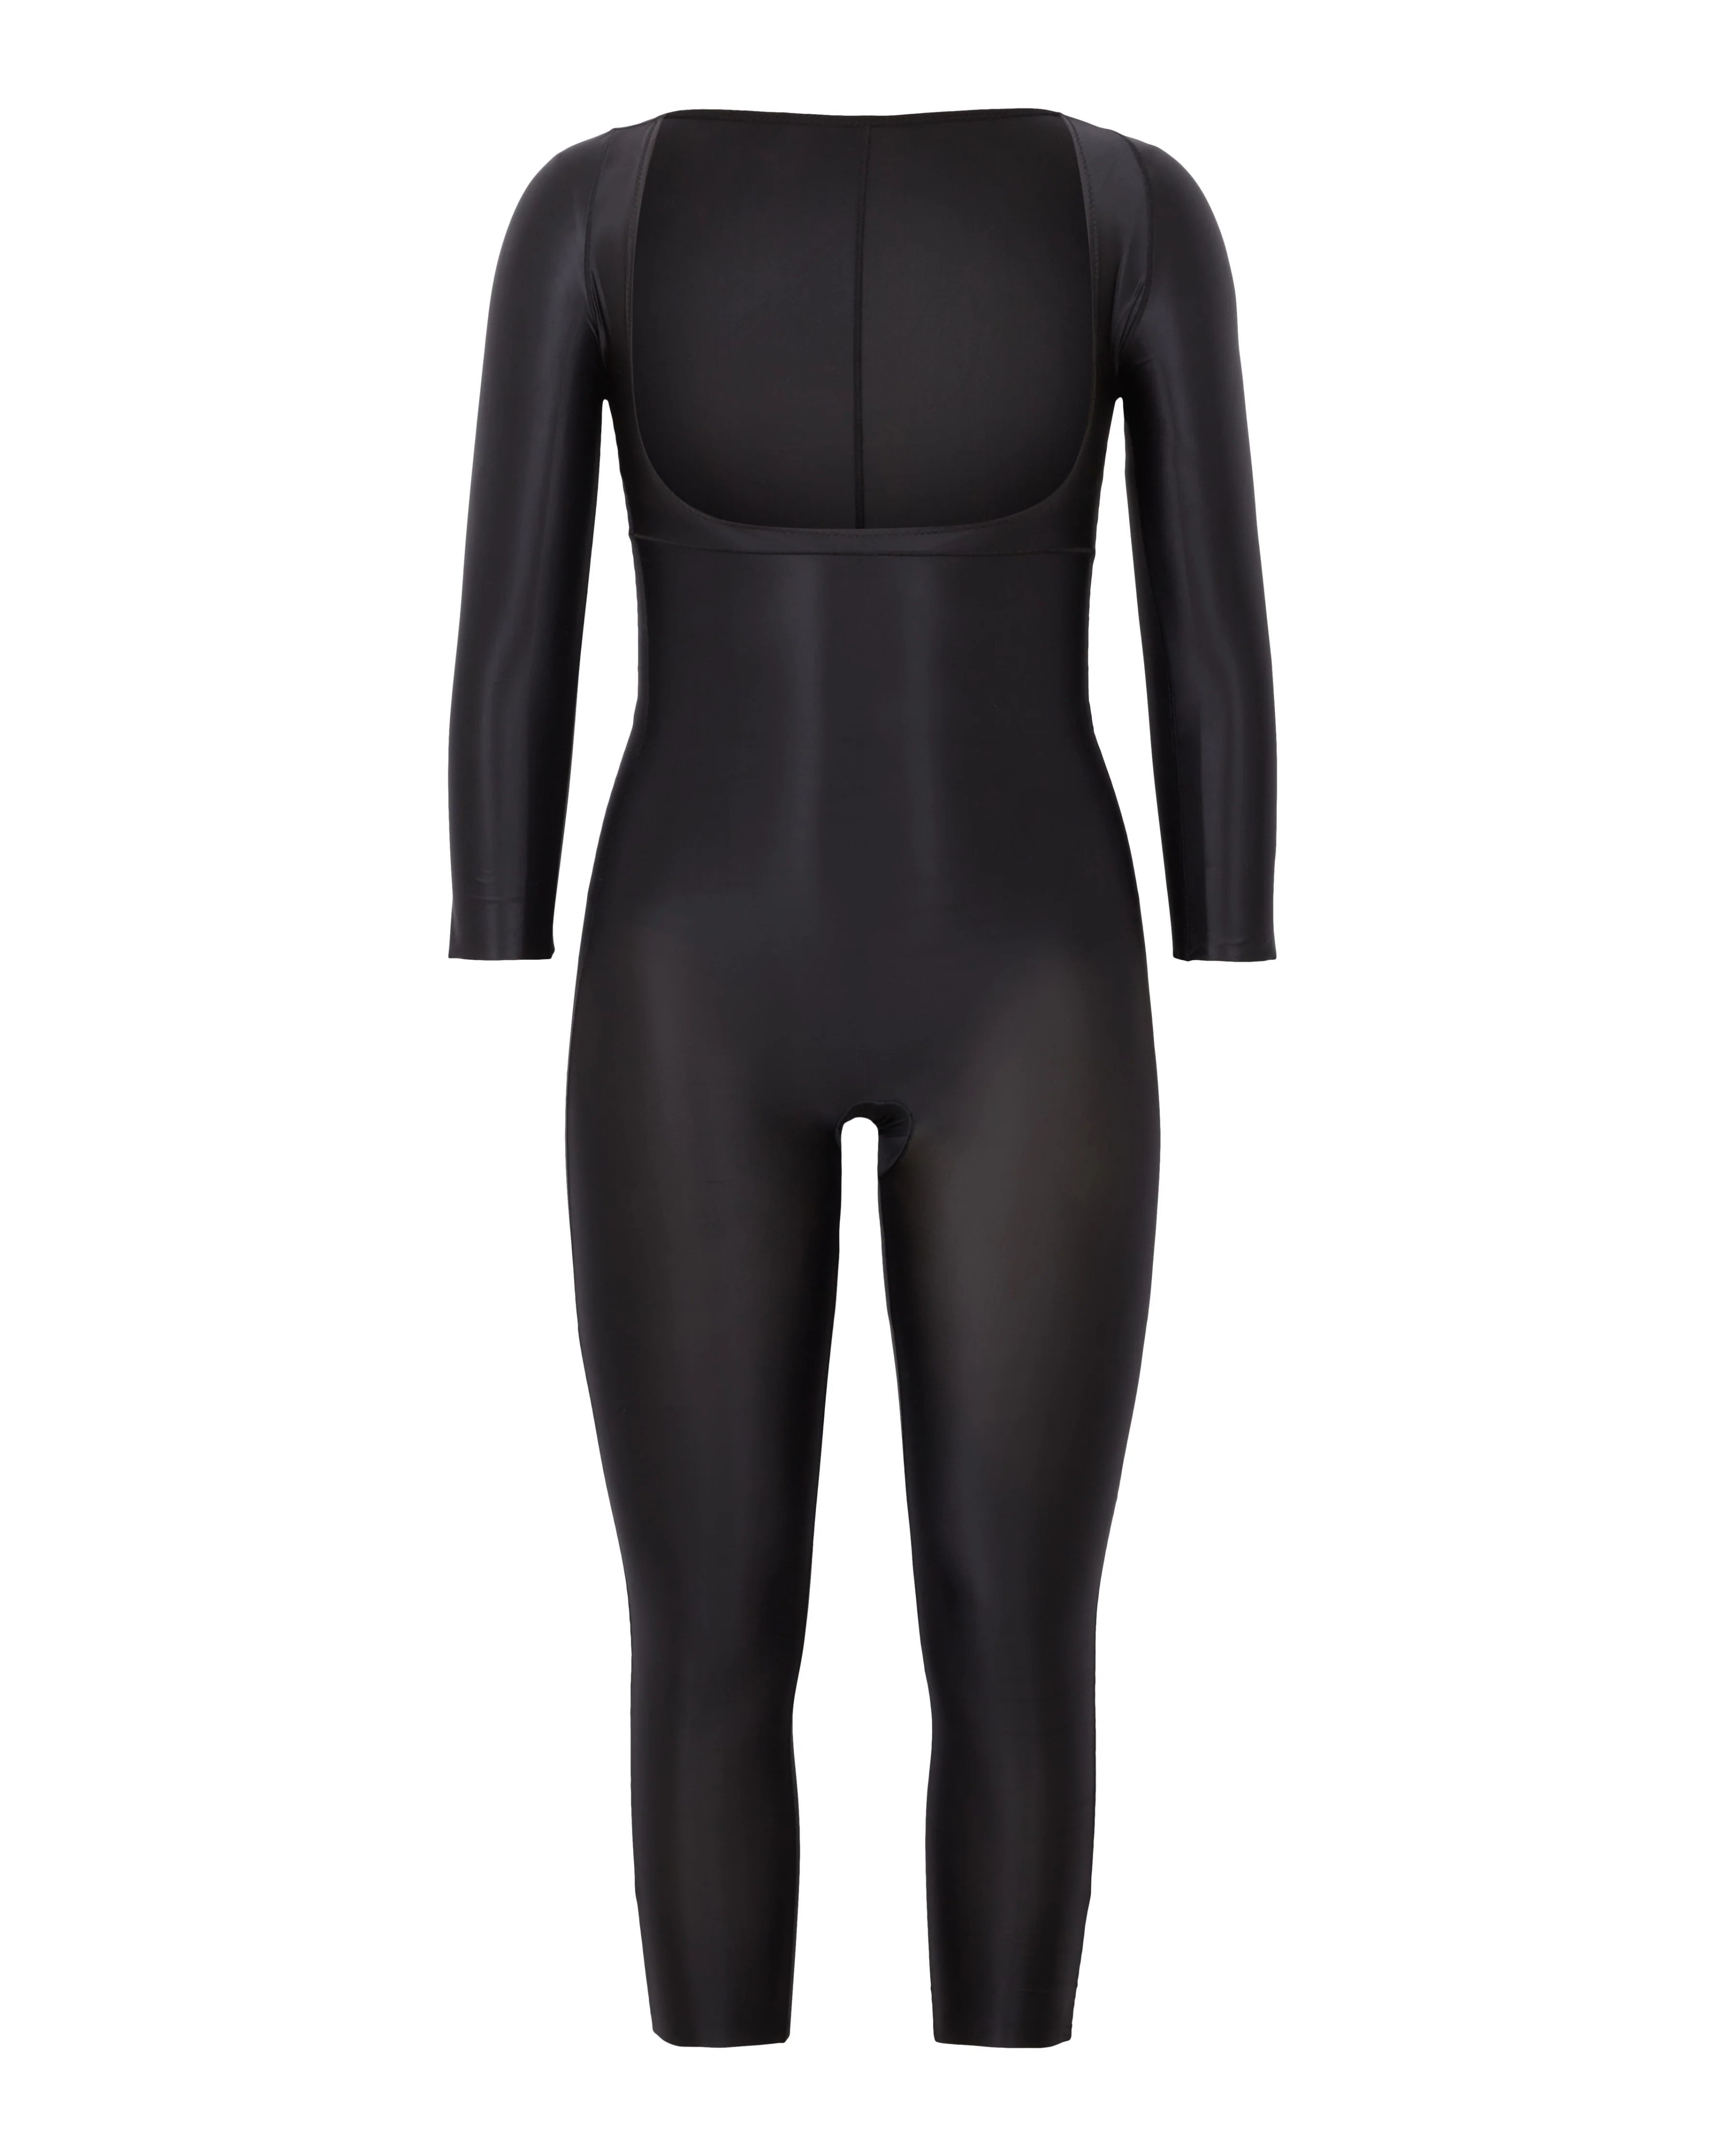 Suit Your Fancy Open-Bust 3/4 Sleeve Catsuit | Spanx